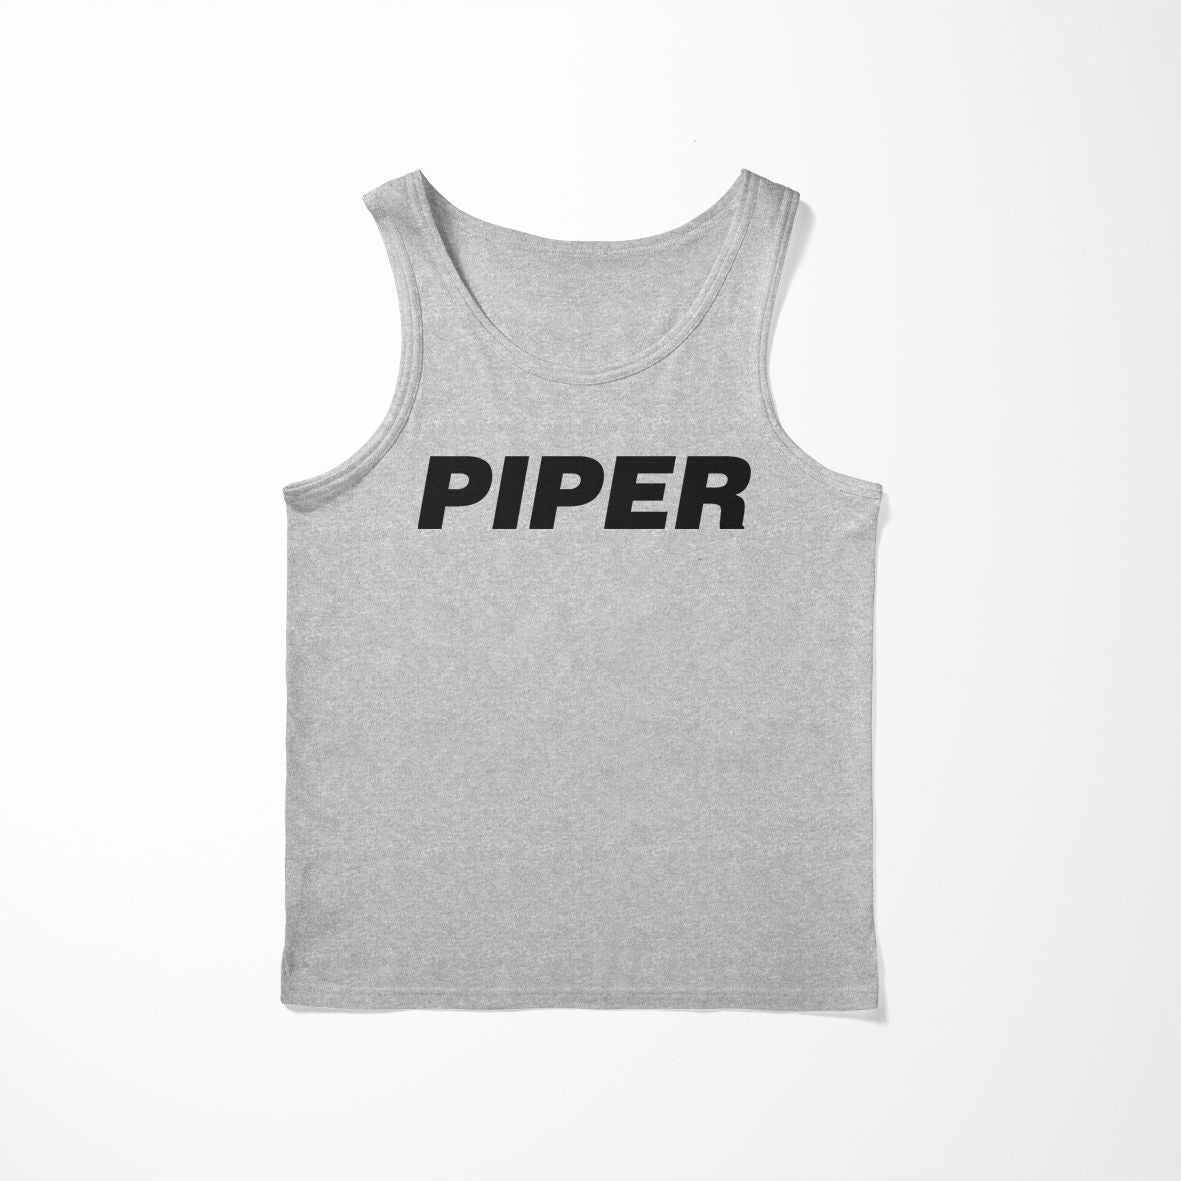 Piper & Text Designed Tank Top